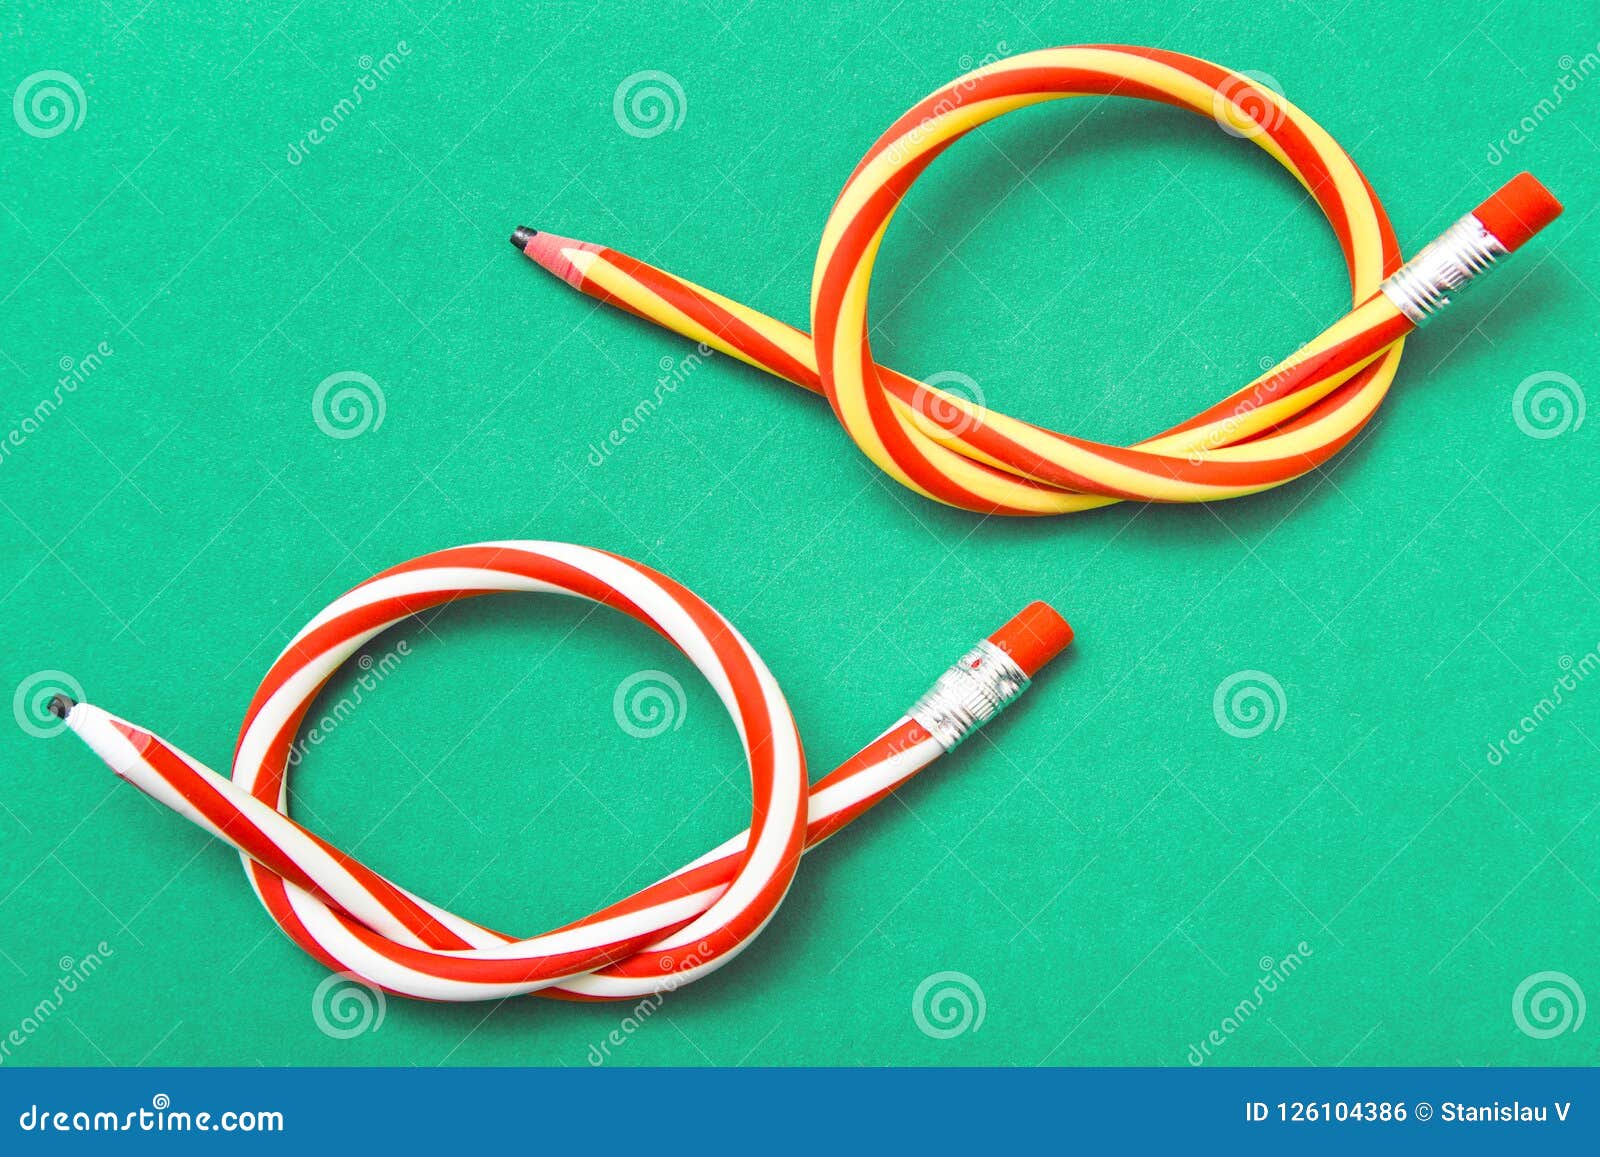 Flexible pencil on a textured cardboard background. Bent pencils two-color  Stock Photo